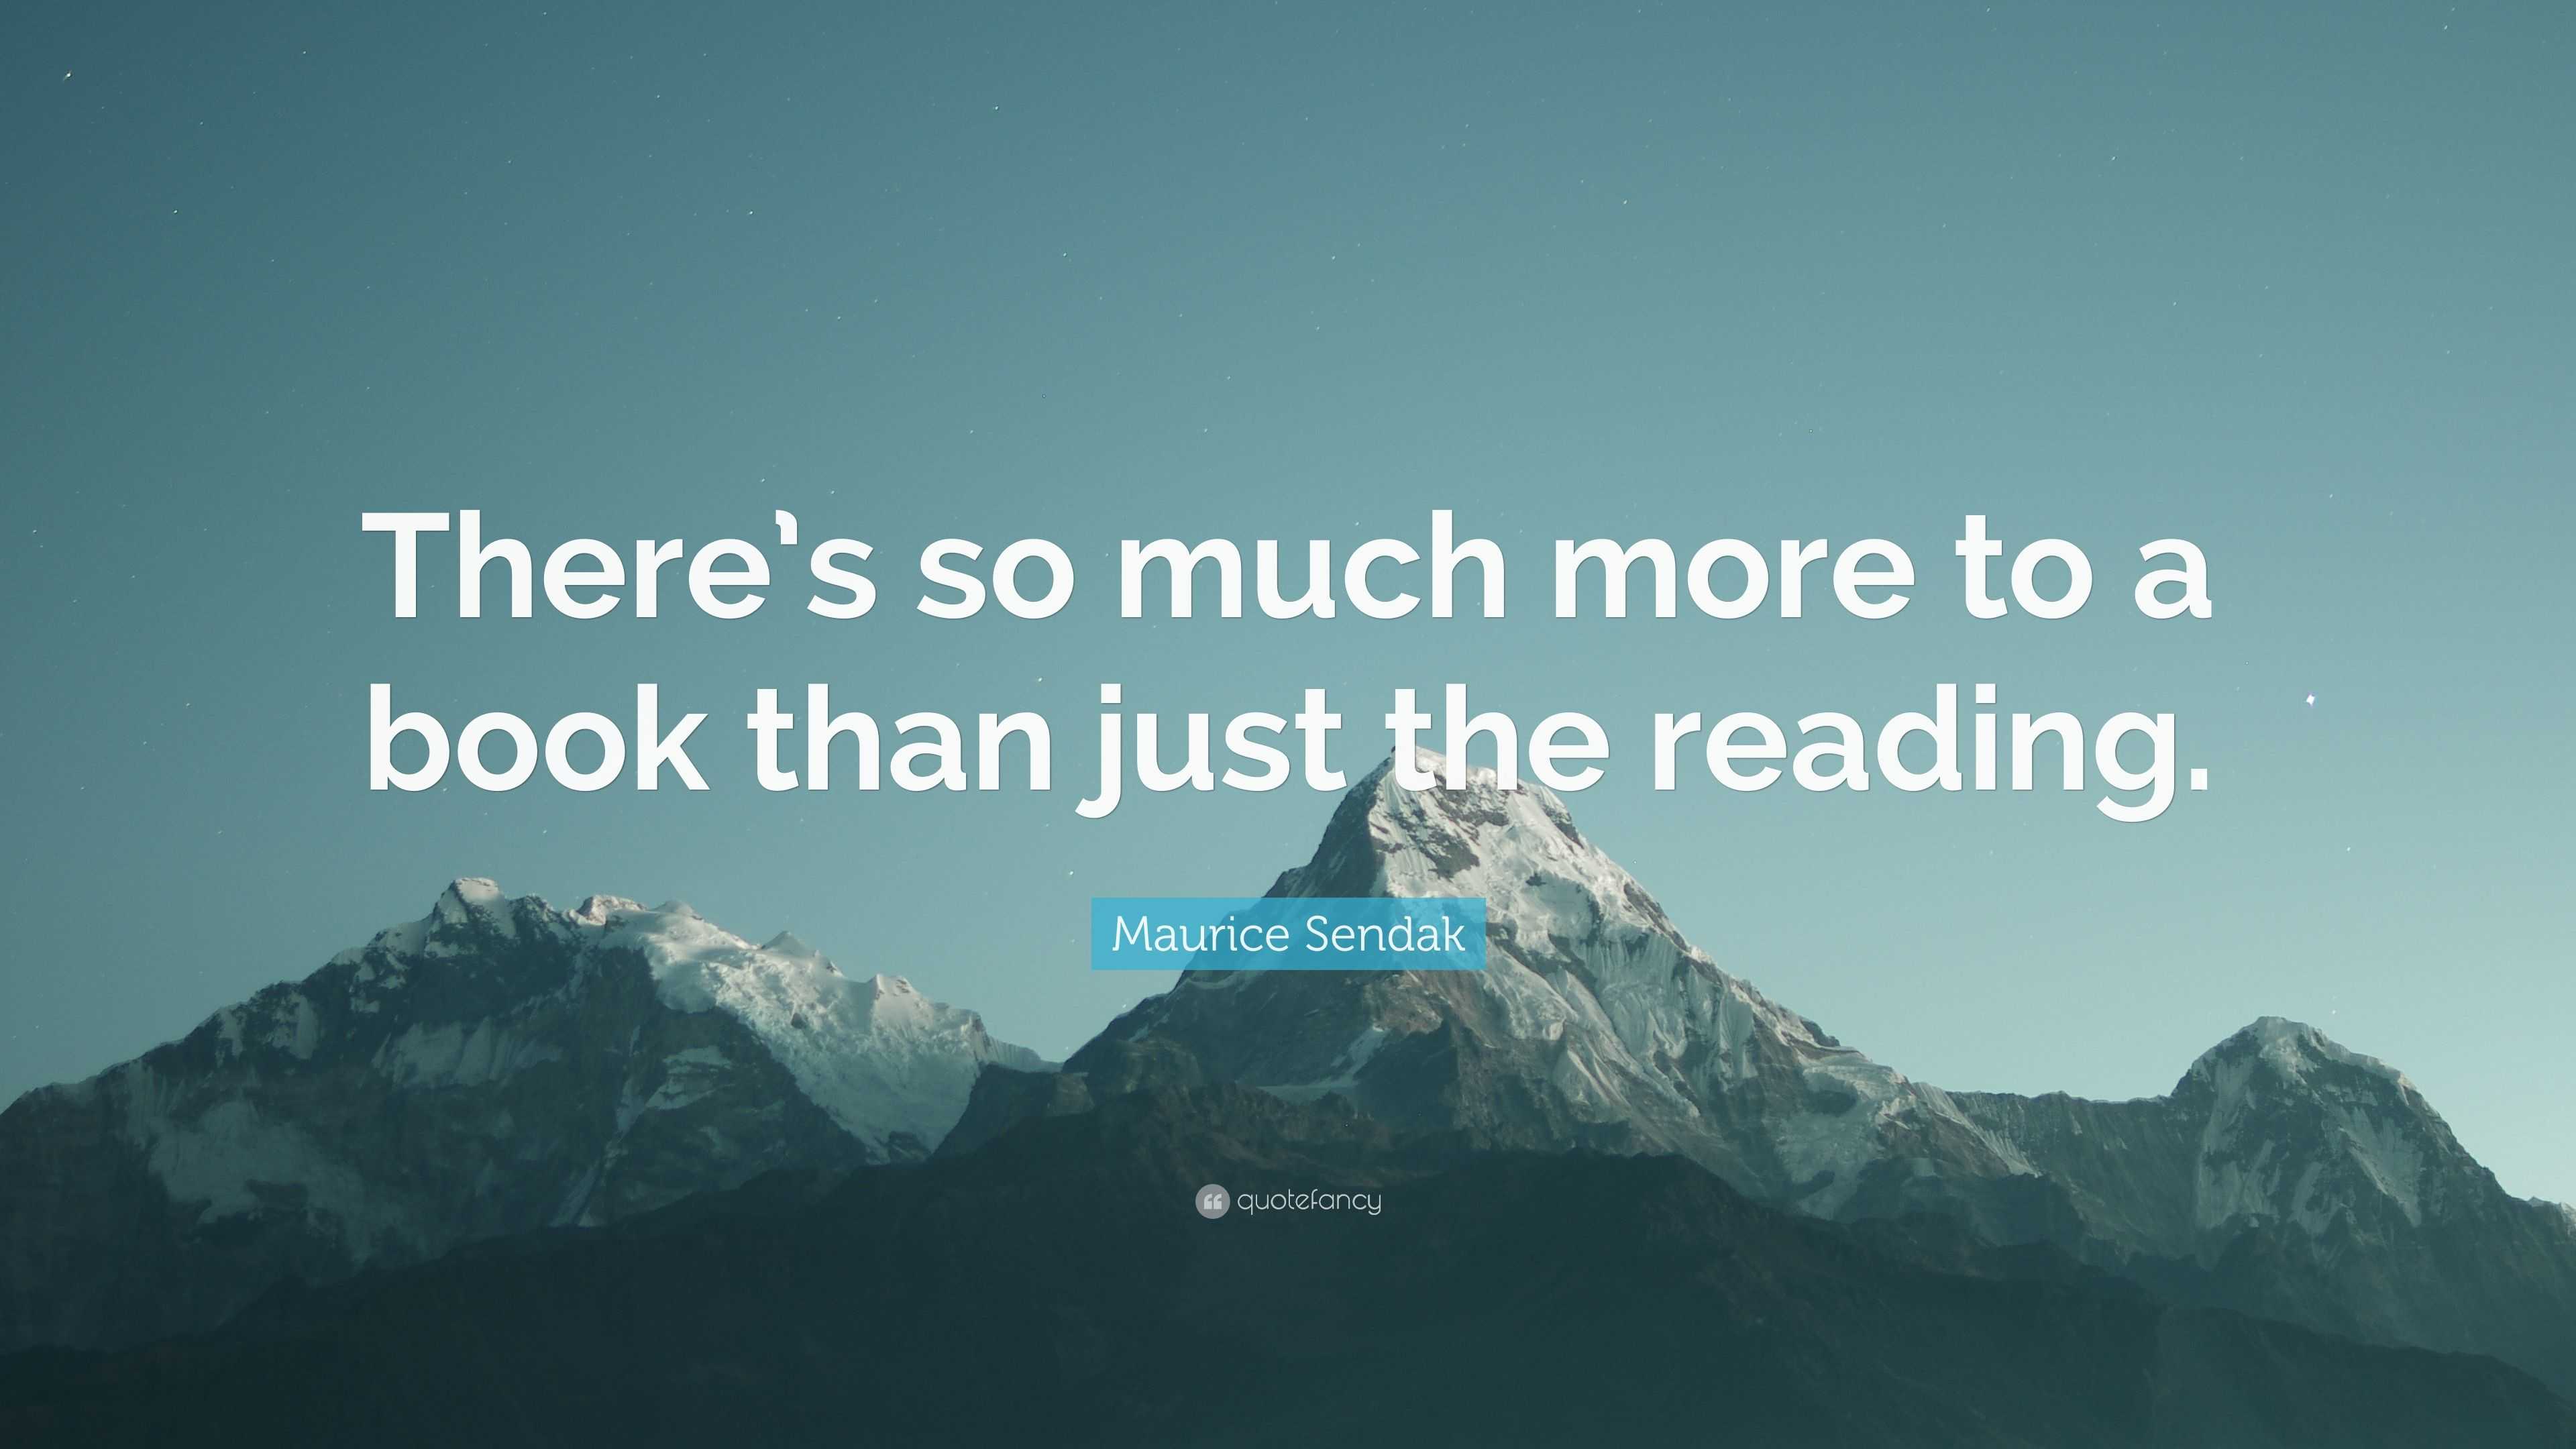 Maurice Sendak Quote: “There’s so much more to a book than just the ...